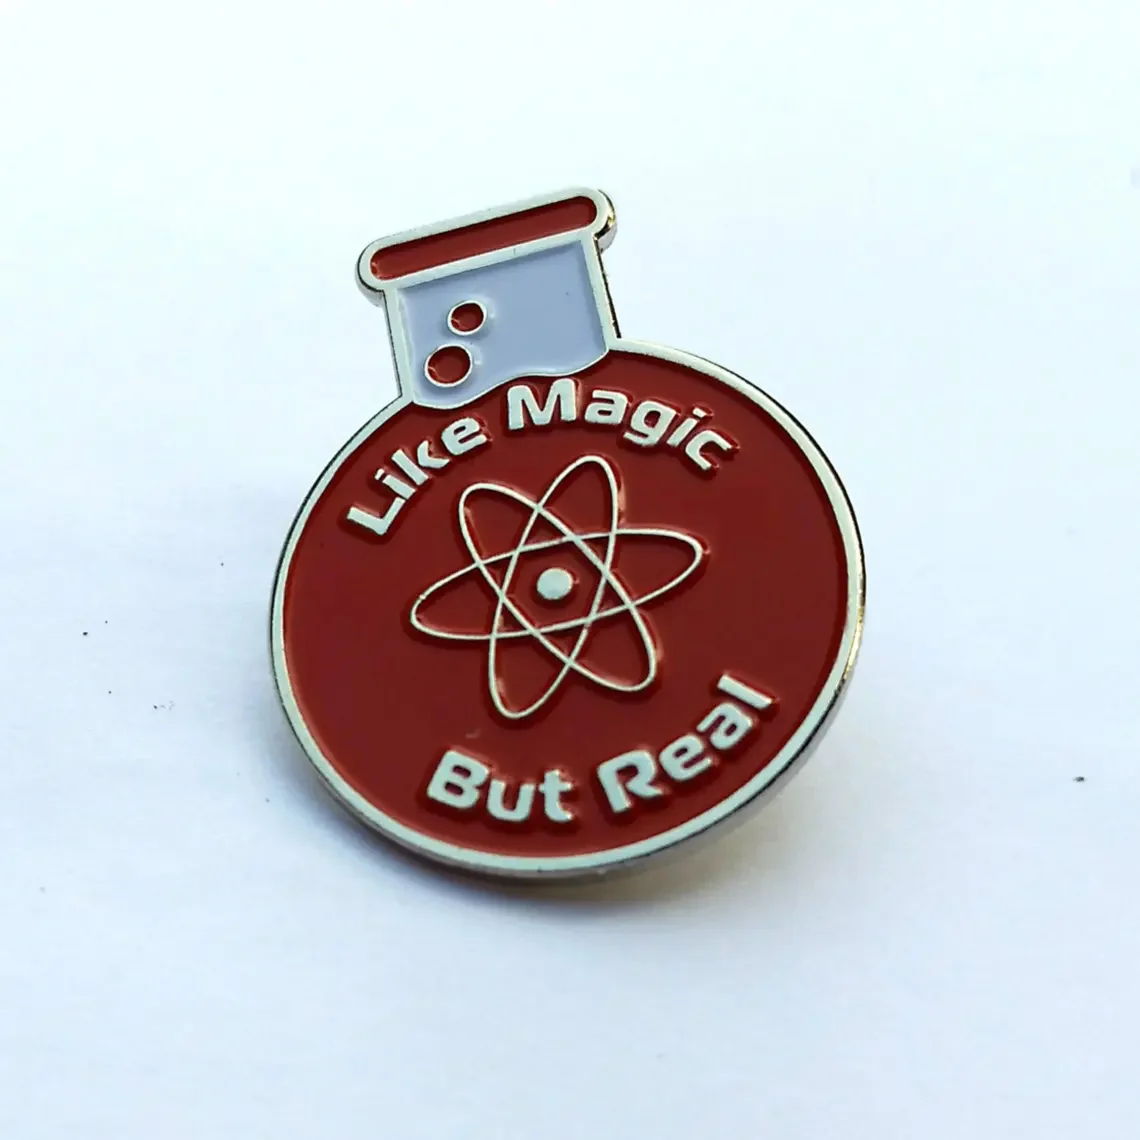 

Harong New Science Flask Enamel Pin Funny “science Like Magic but Real” Lapel Brooch Badge for Chemical Laboratory Friend Gift